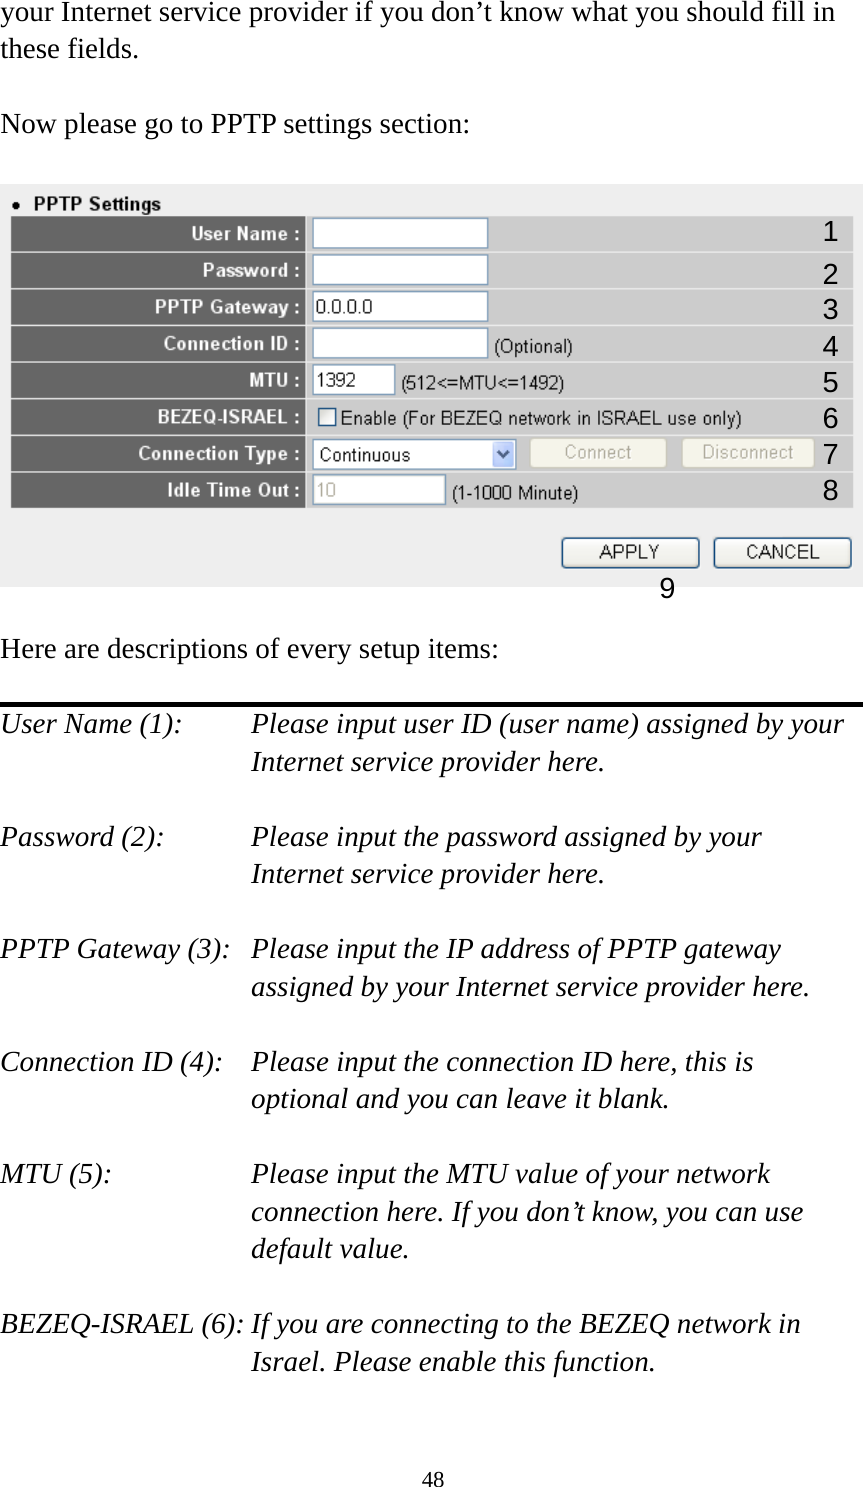 48 your Internet service provider if you don’t know what you should fill in these fields.  Now please go to PPTP settings section:    Here are descriptions of every setup items:  User Name (1):    Please input user ID (user name) assigned by your Internet service provider here.  Password (2):    Please input the password assigned by your Internet service provider here.  PPTP Gateway (3):   Please input the IP address of PPTP gateway assigned by your Internet service provider here.  Connection ID (4):    Please input the connection ID here, this is optional and you can leave it blank.  MTU (5):    Please input the MTU value of your network connection here. If you don’t know, you can use default value.  BEZEQ-ISRAEL (6): If you are connecting to the BEZEQ network in Israel. Please enable this function.  123 4 5 7 8 96 